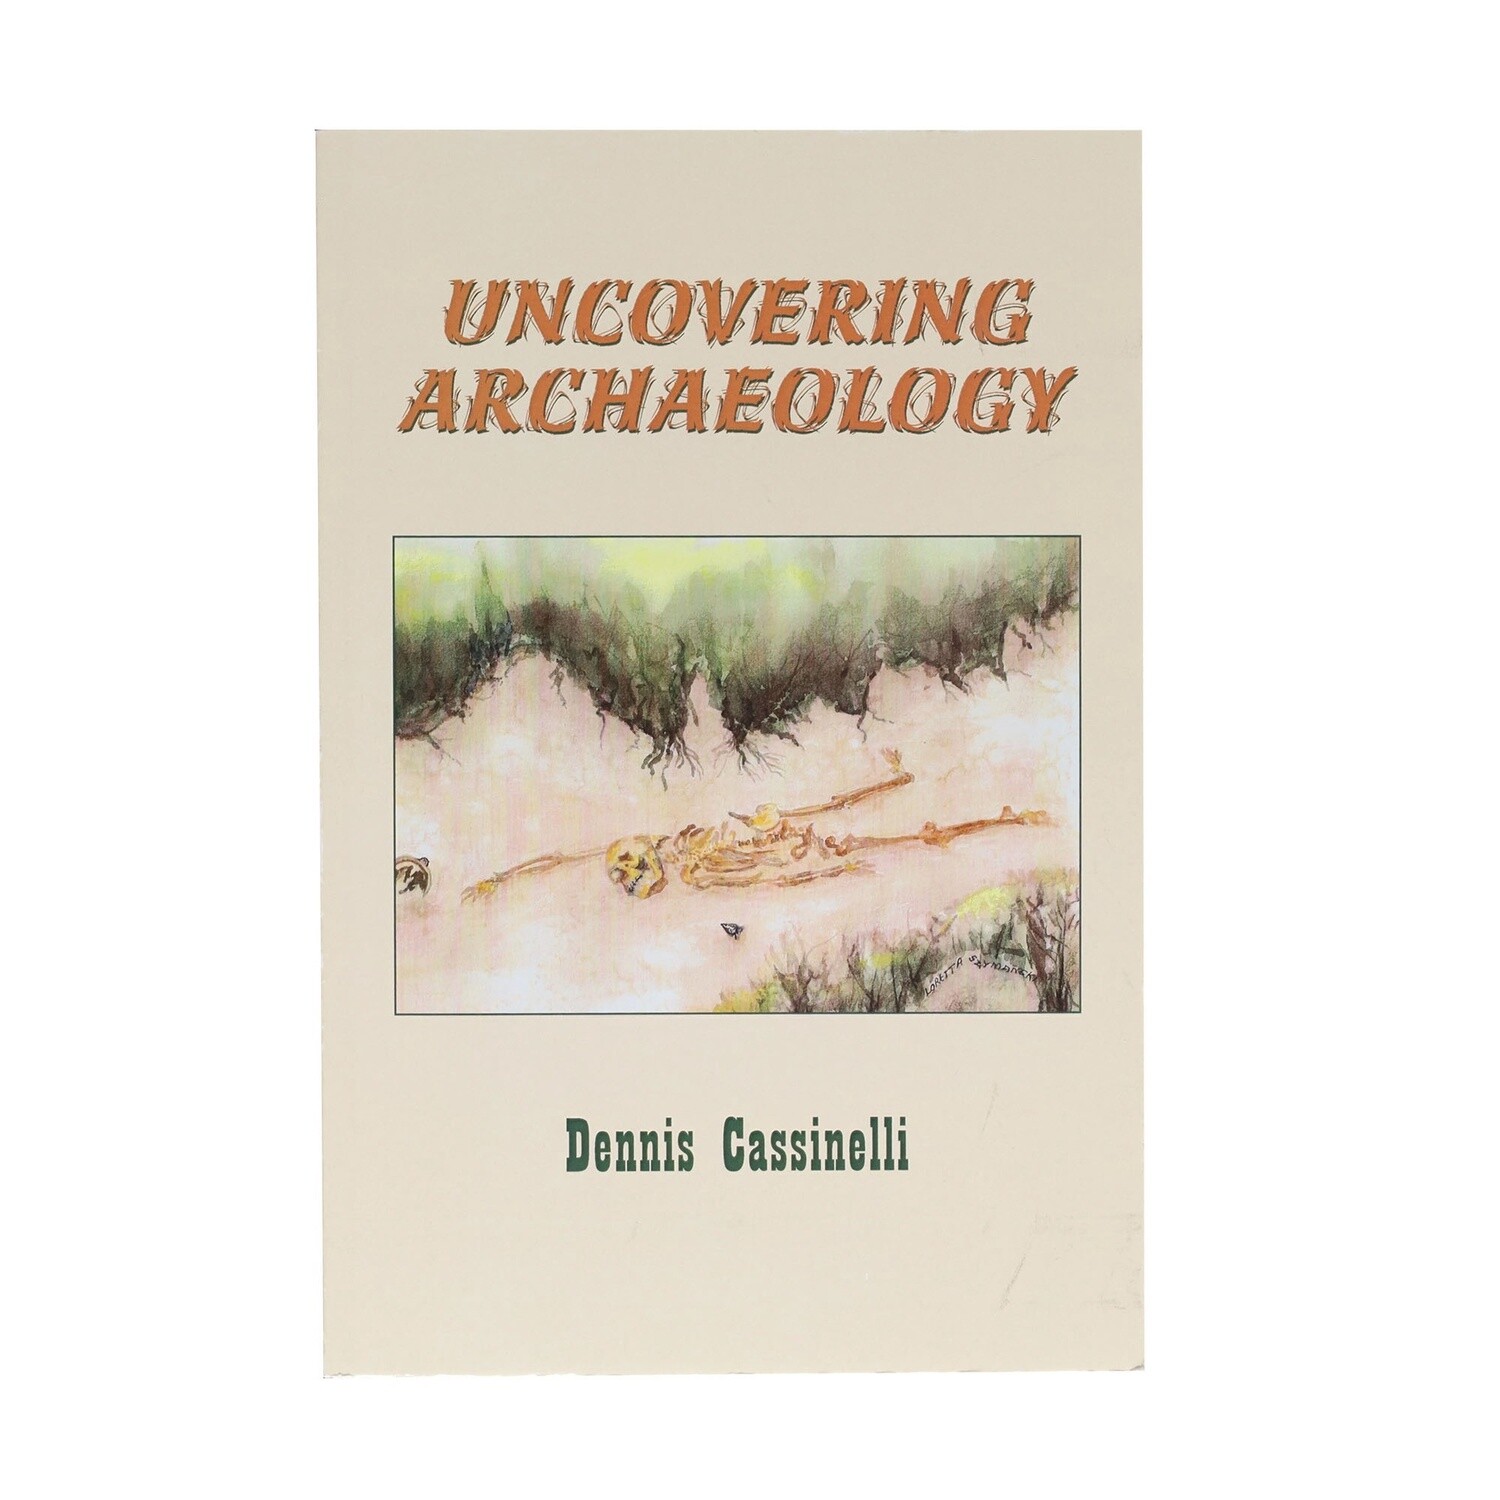 Uncovering Archaeology by Dennis Cassinelli